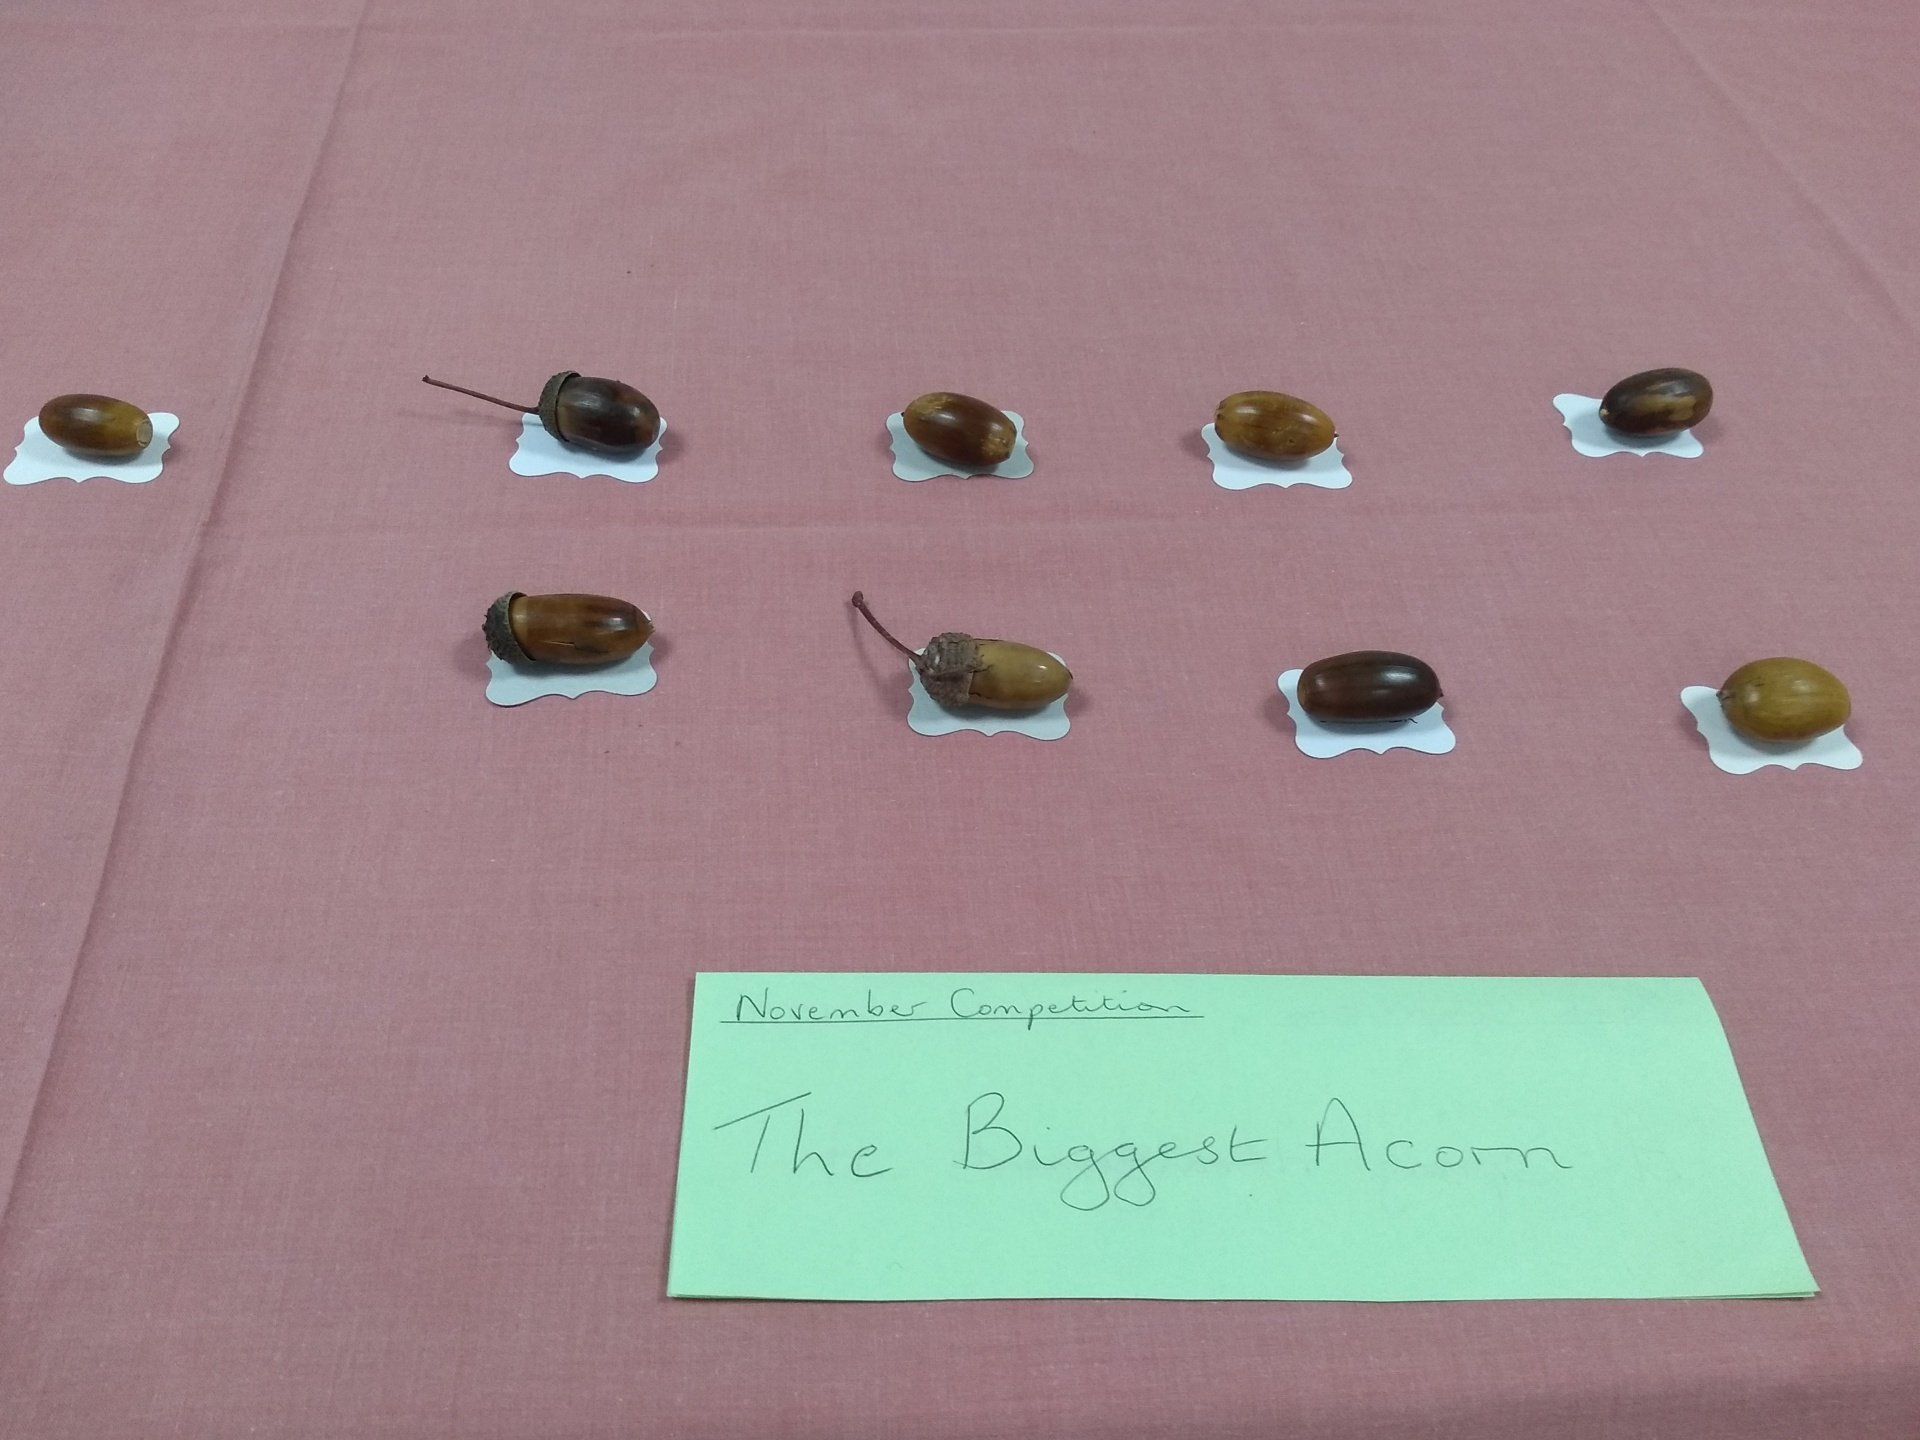 A view of all of the acorns